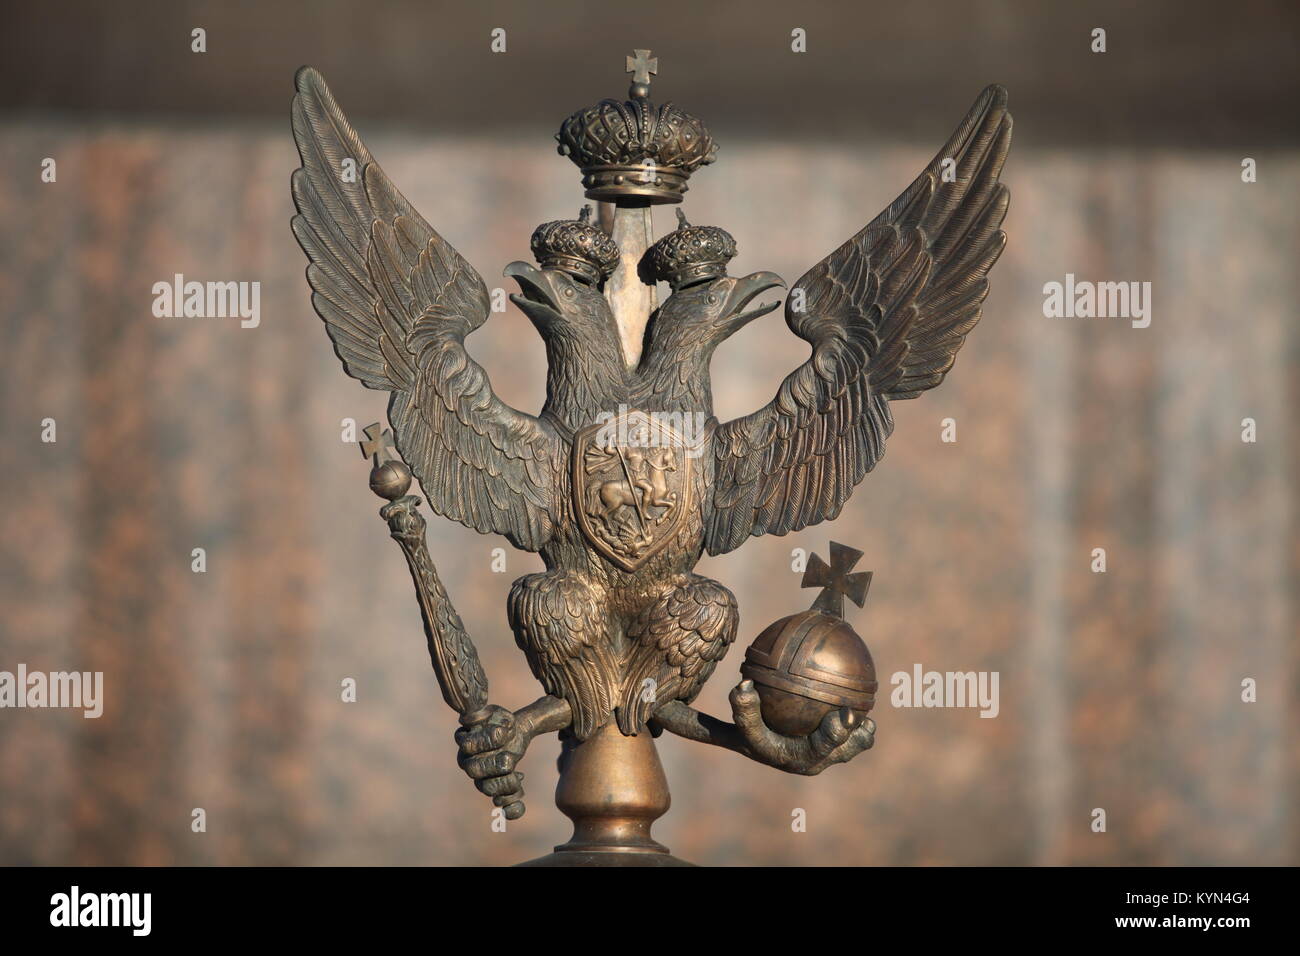 bronze double-headed eagle emblem of russia Stock Photo